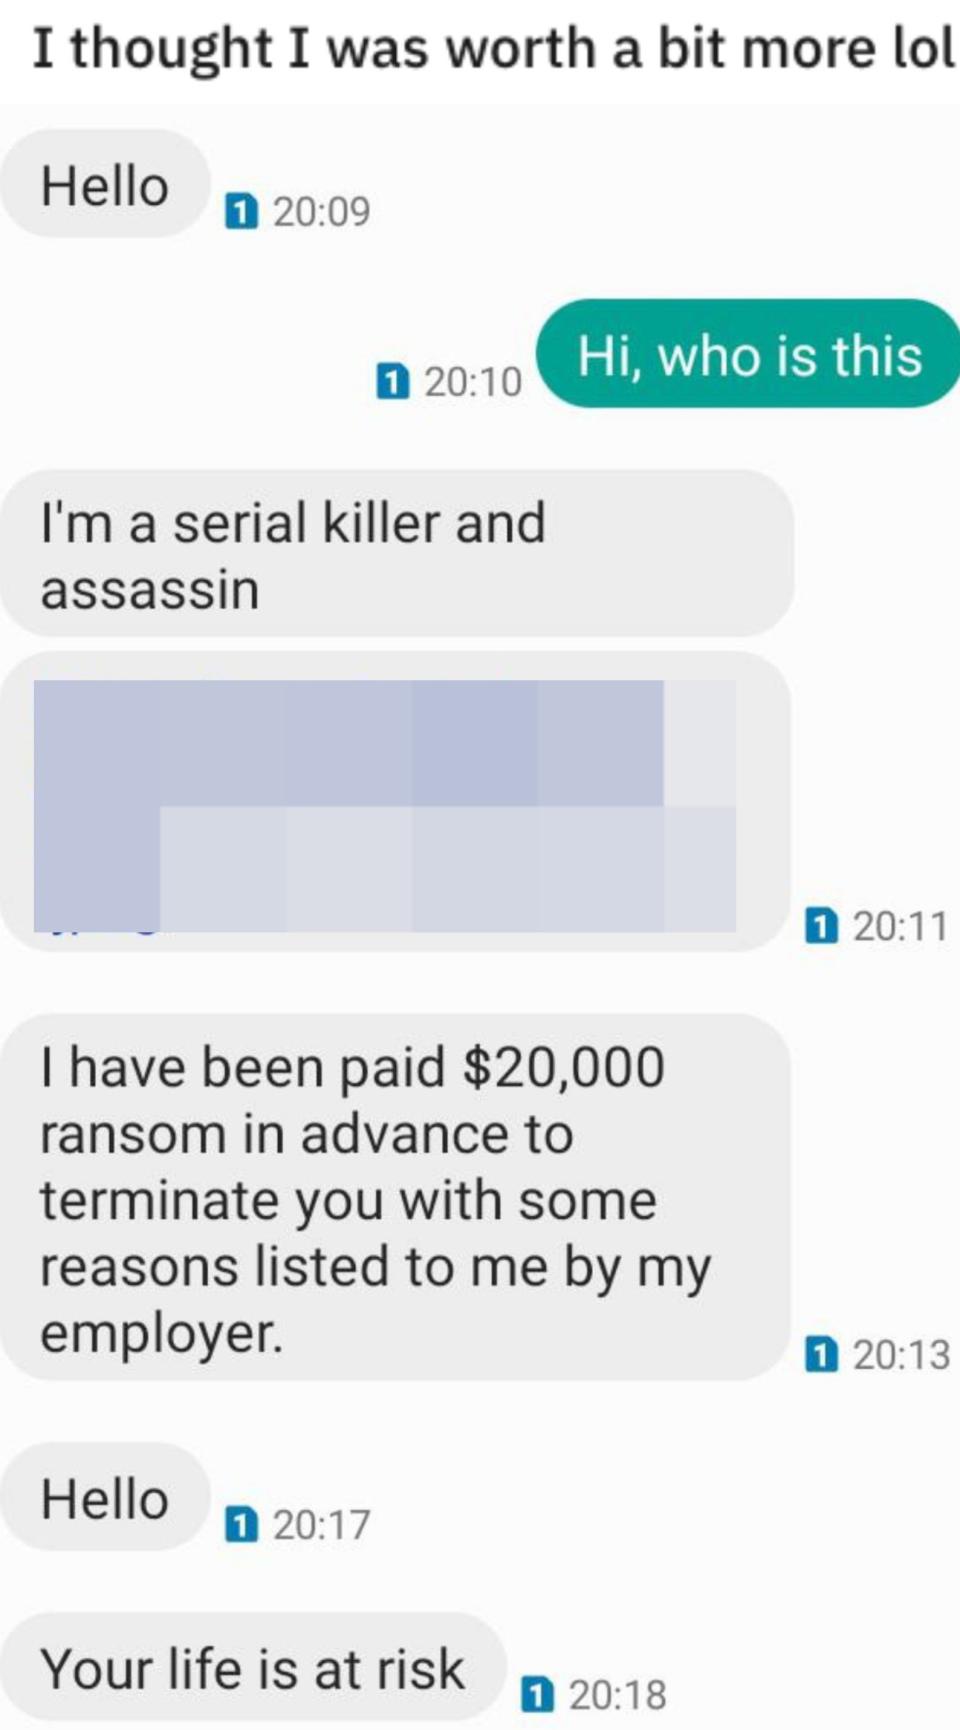 a person saying they thought they were worth more in response to a threat from a "hitman" saying they were paid $20,000 to terminate them